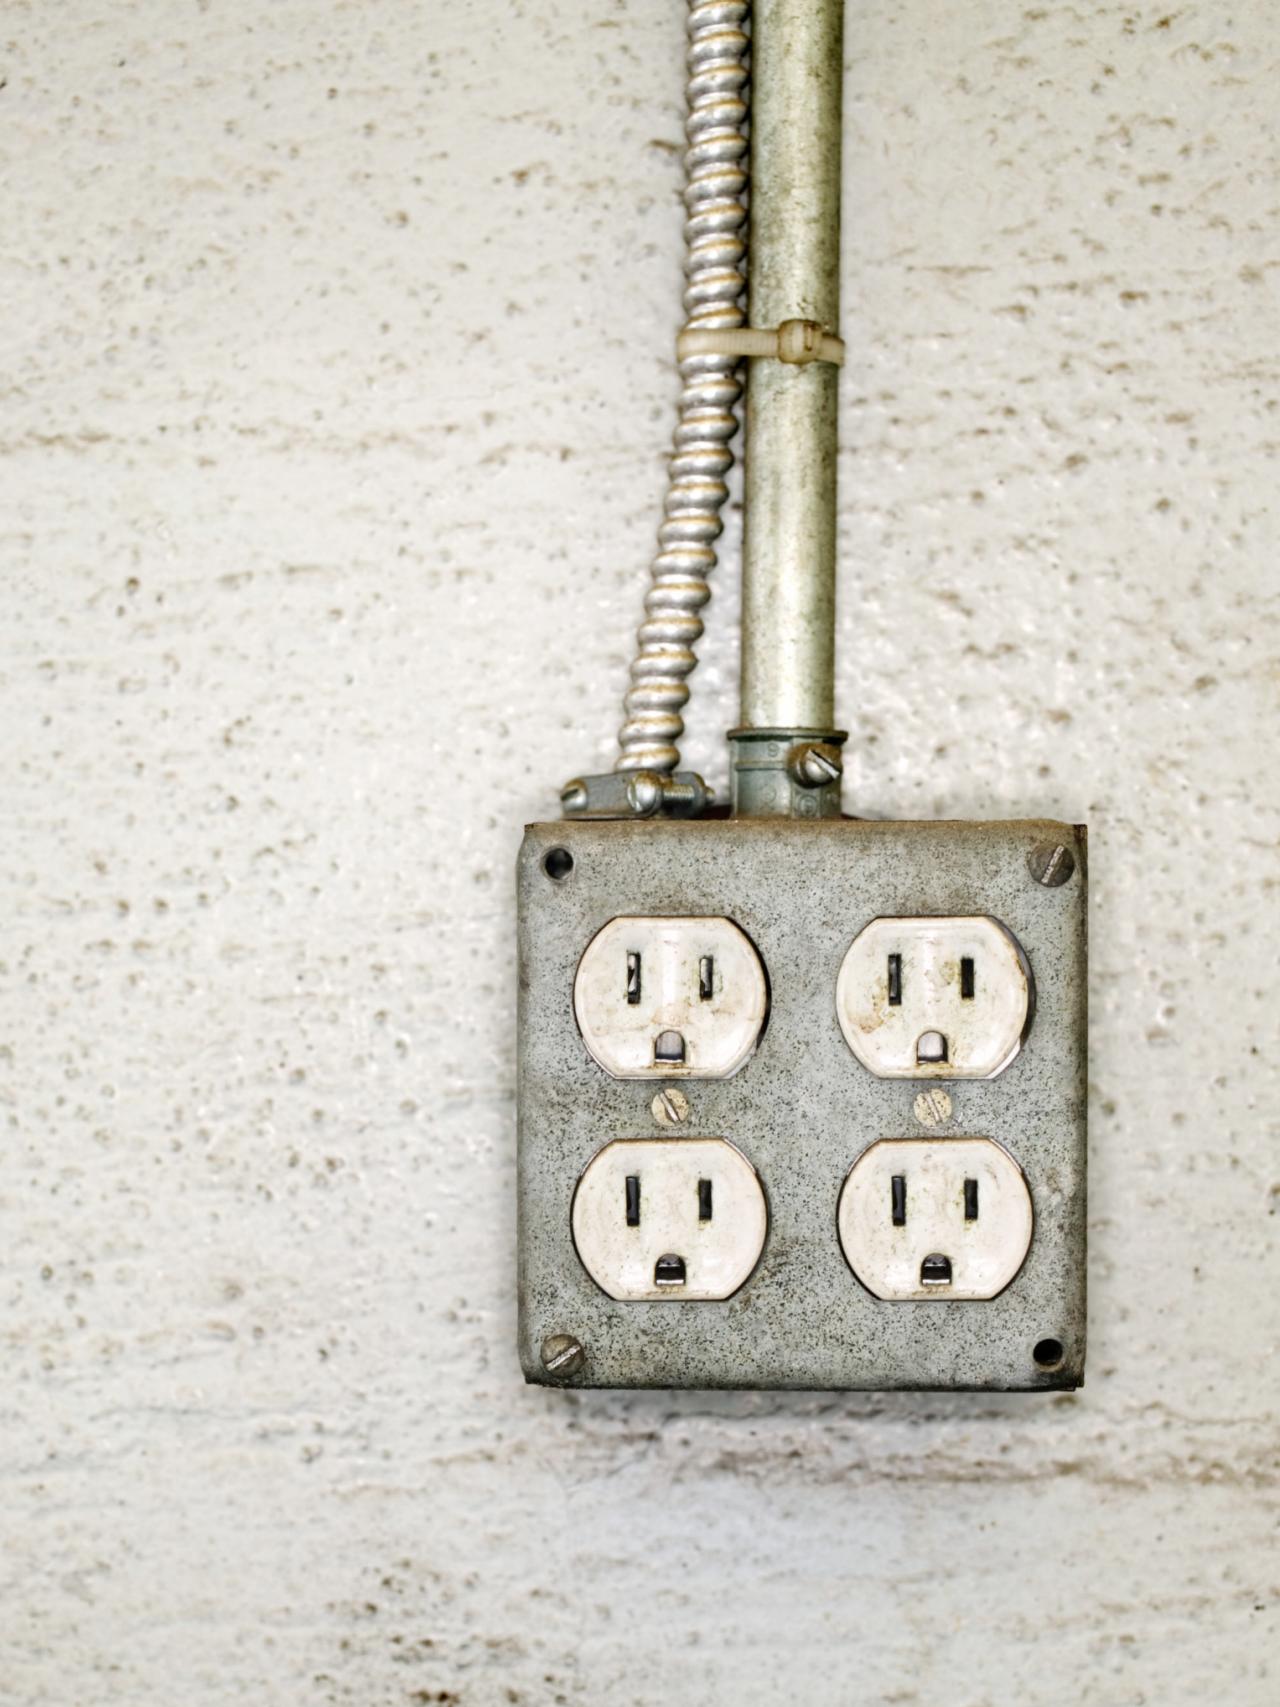 Install An Exterior Electrical Outlet